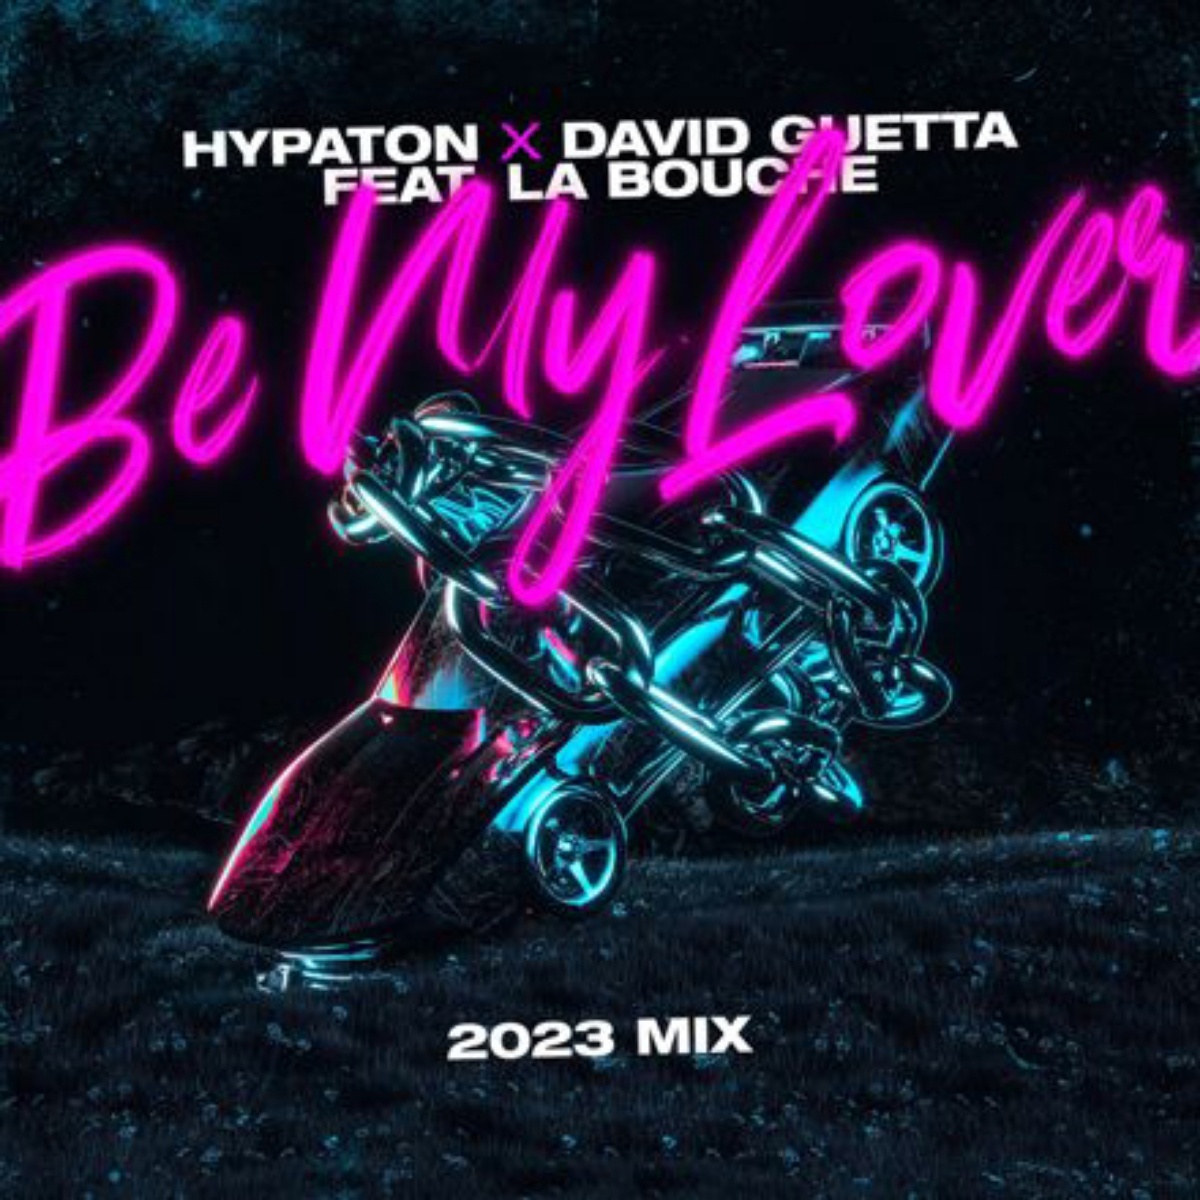 Hypaton & David Guetta feat. La Bouche - Be My Lover (2023 Extended Mix)